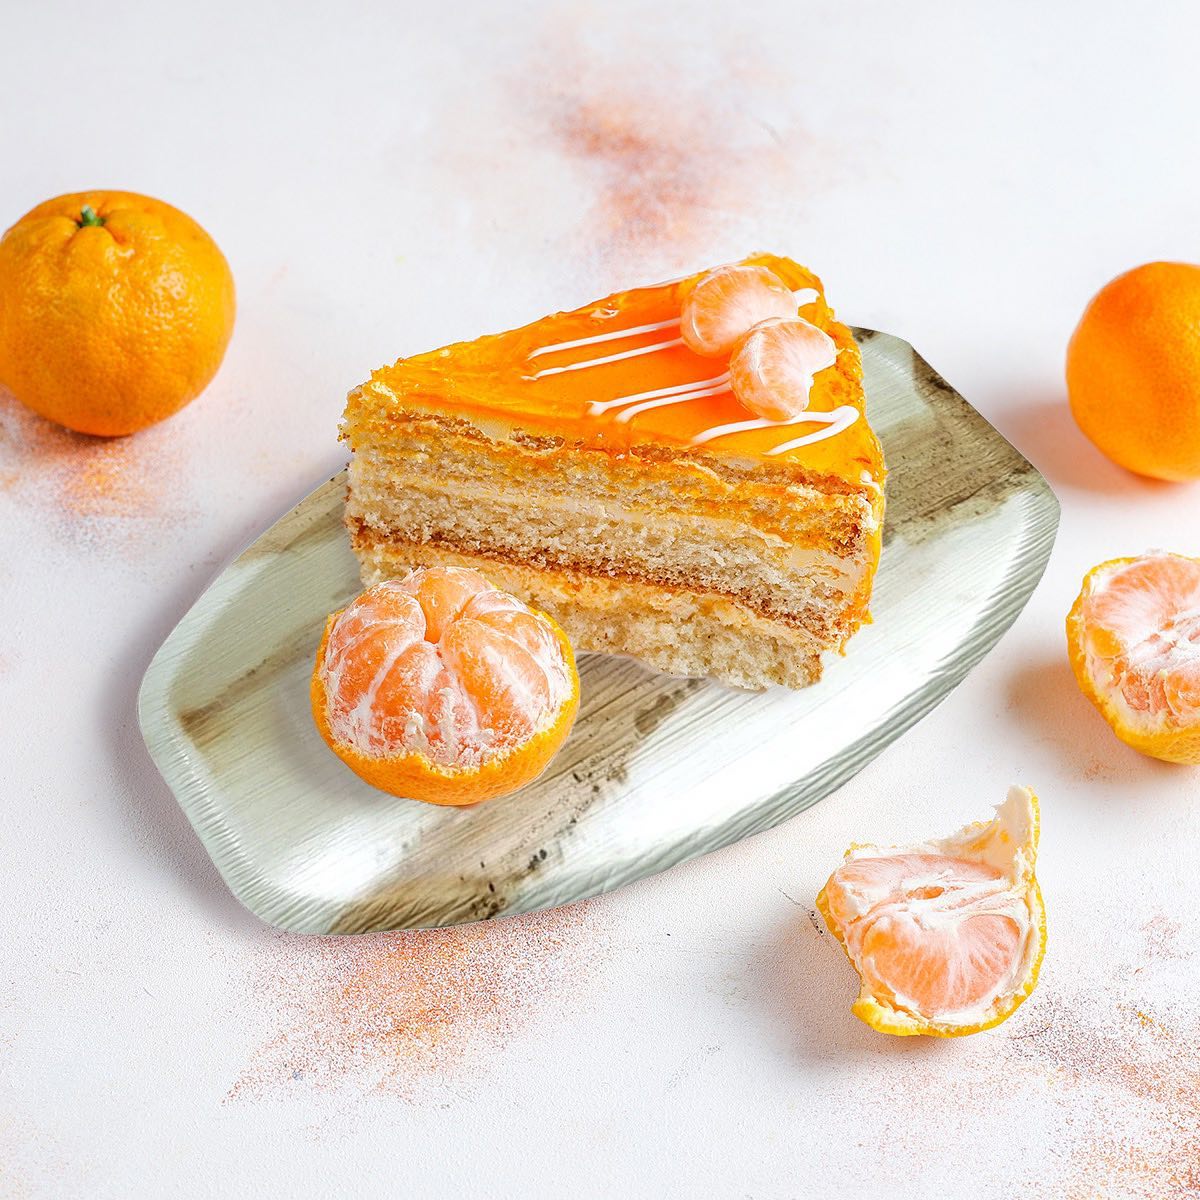 Winter Citrus Delights: Irresistible Desserts for Your Holiday Party